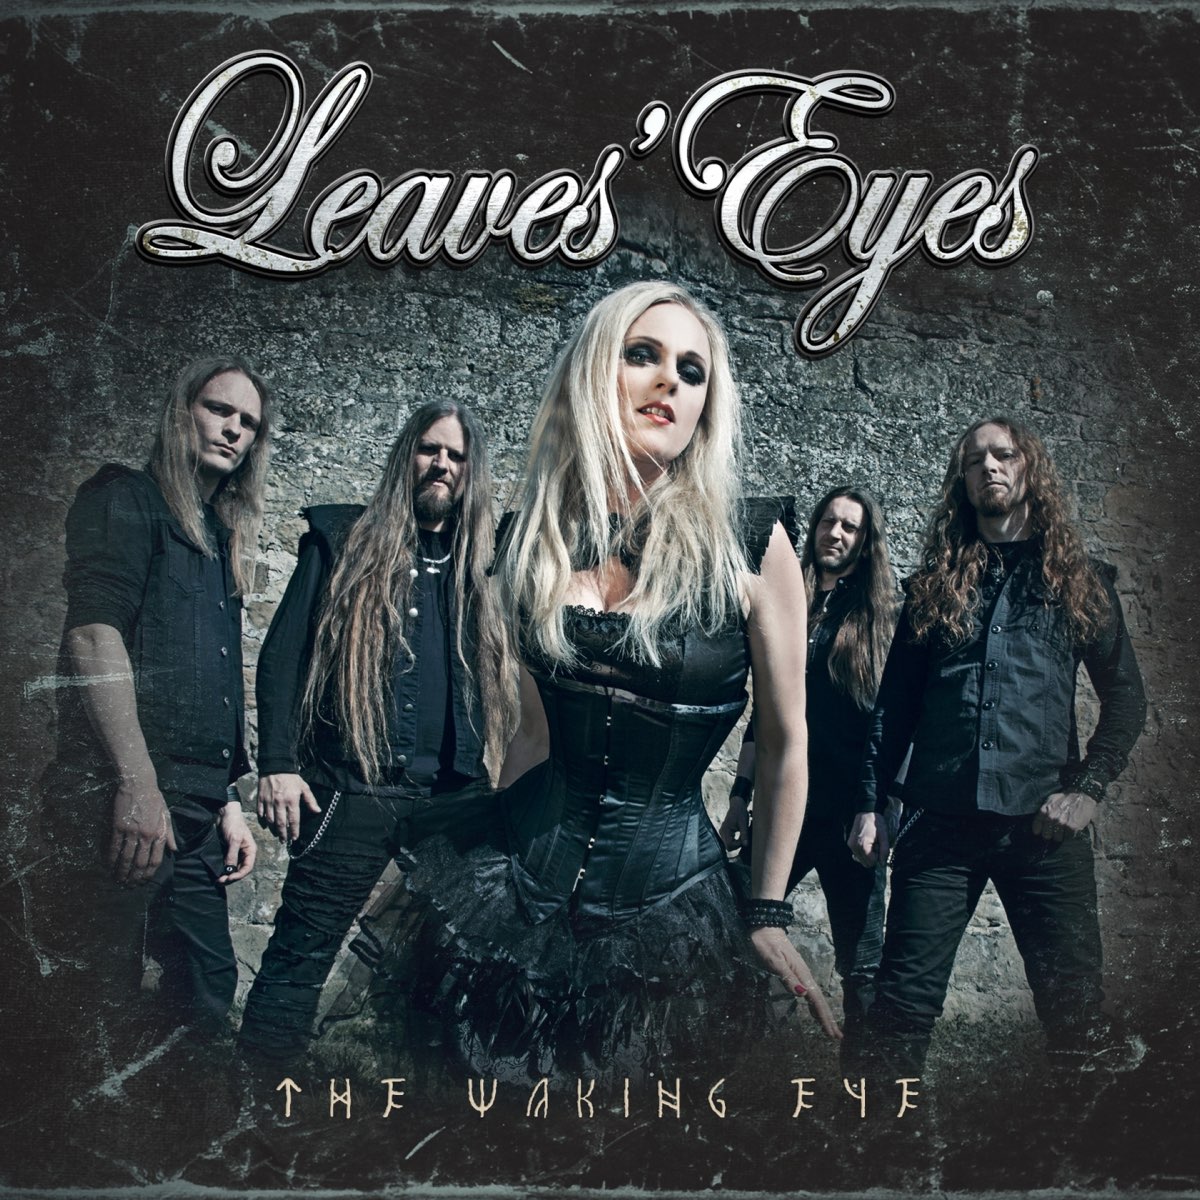 Leaves eyes myths of fate. Группа leaves’ Eyes. Группа leaves’ Eyes 2019. Leaves' Eyes 2015 King of Kings. Leaves' Eyes - discography.